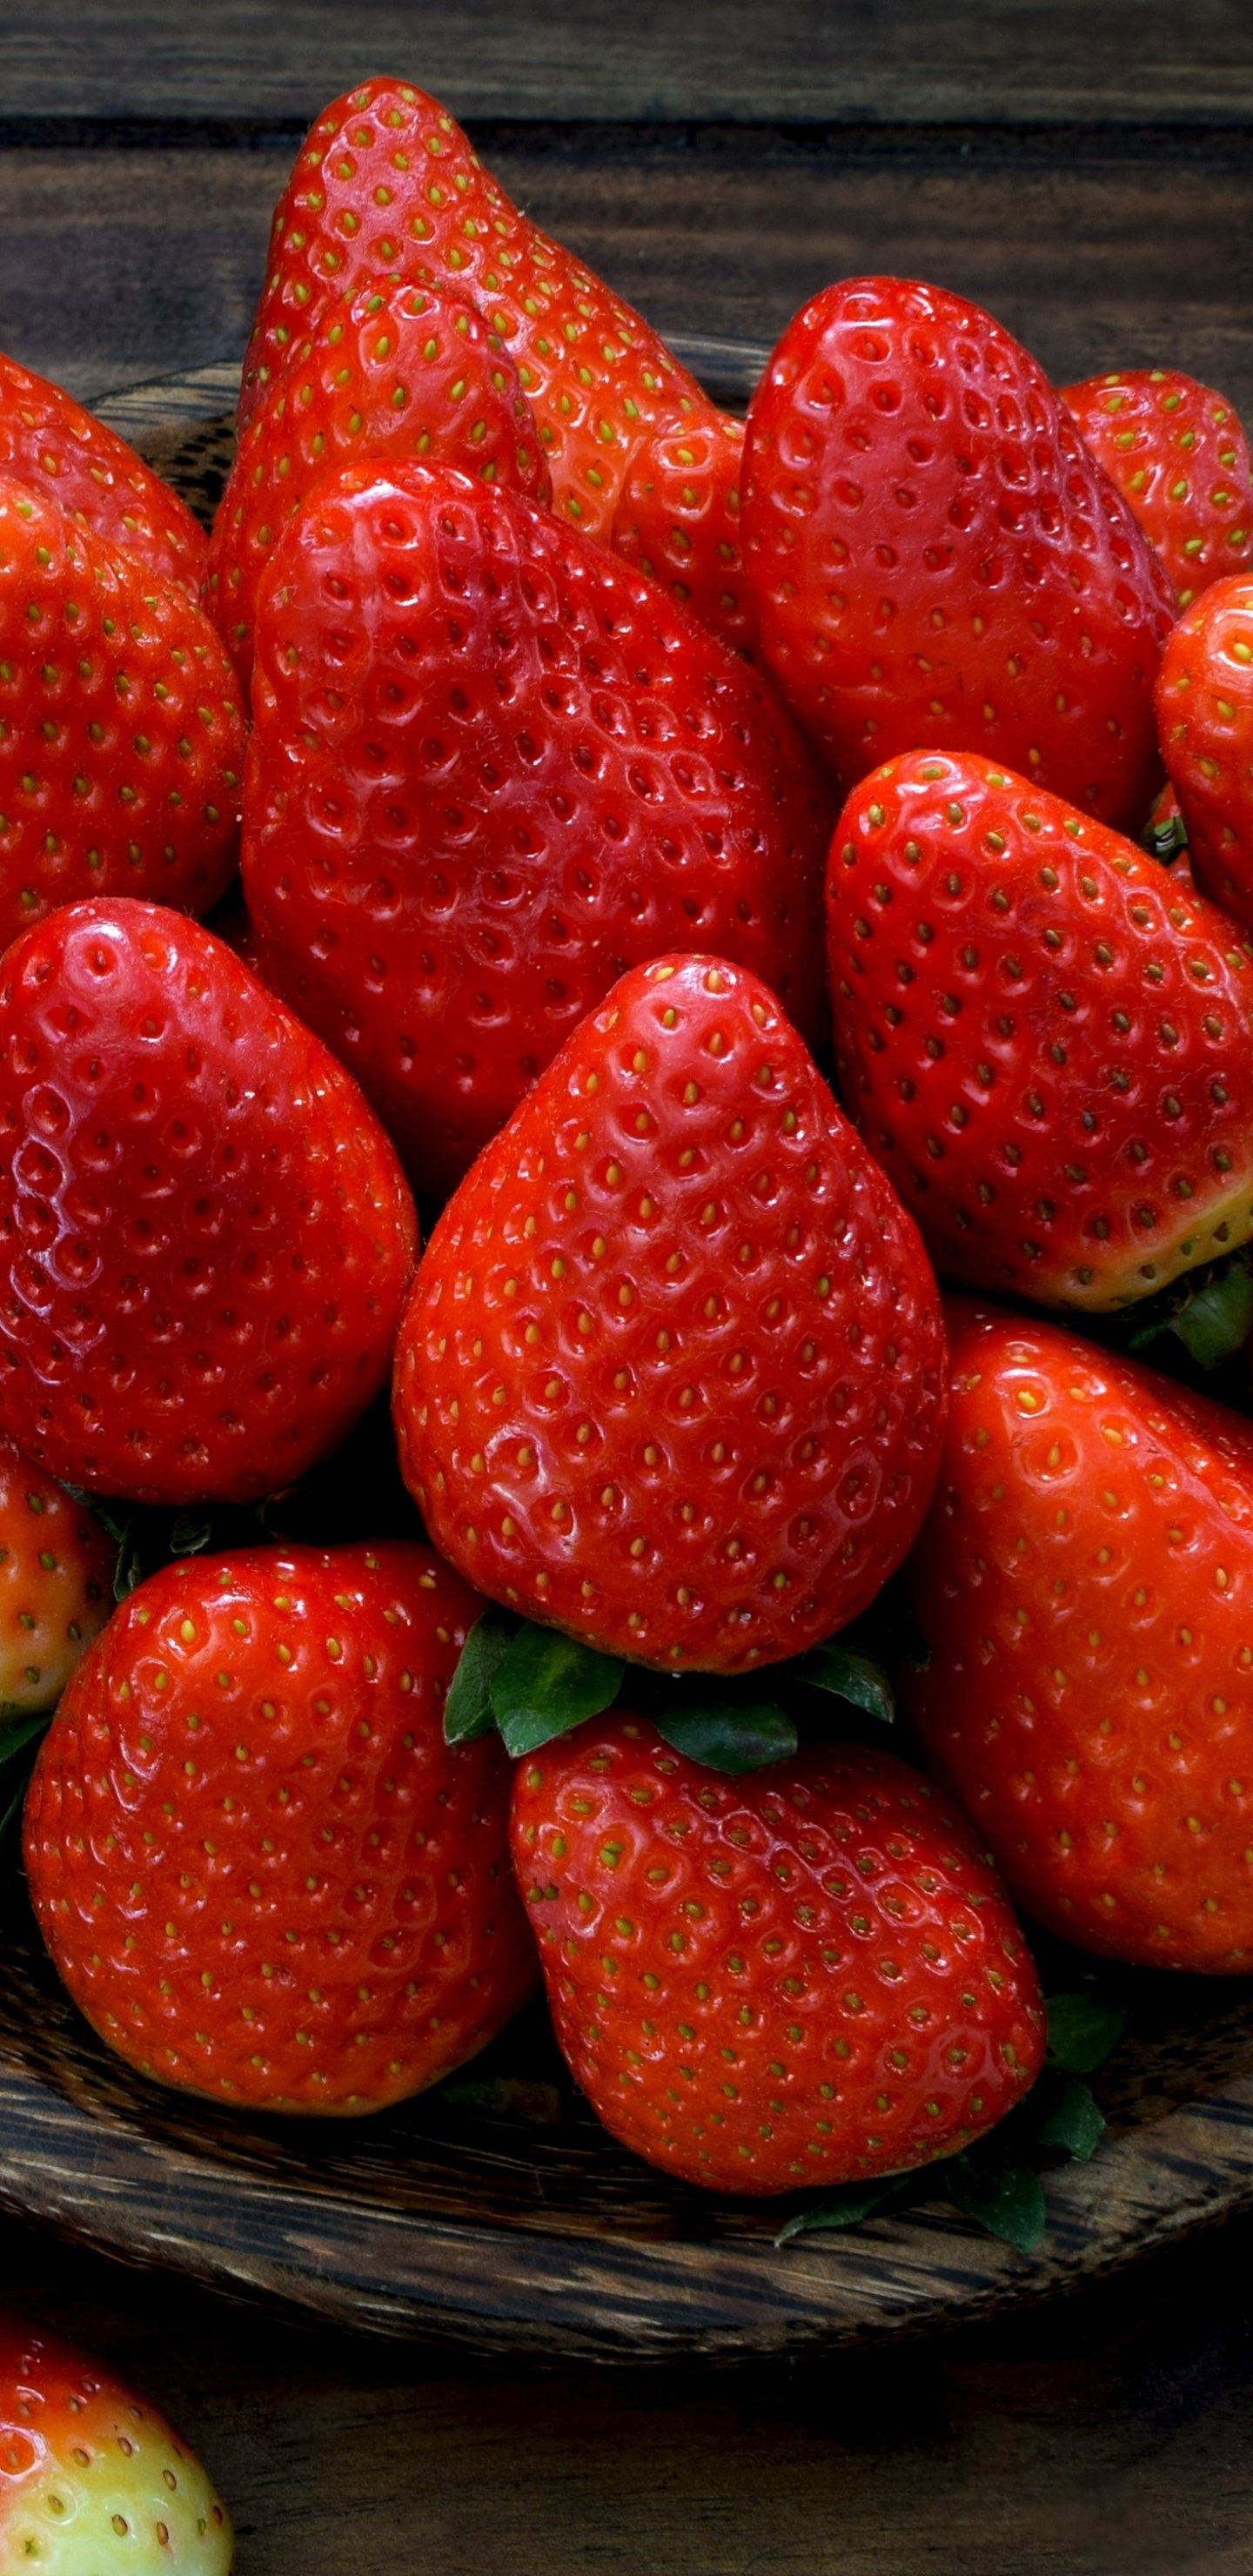 Strawberry: There are about 200 seeds on an average fruit. 1440x2960 HD Background.